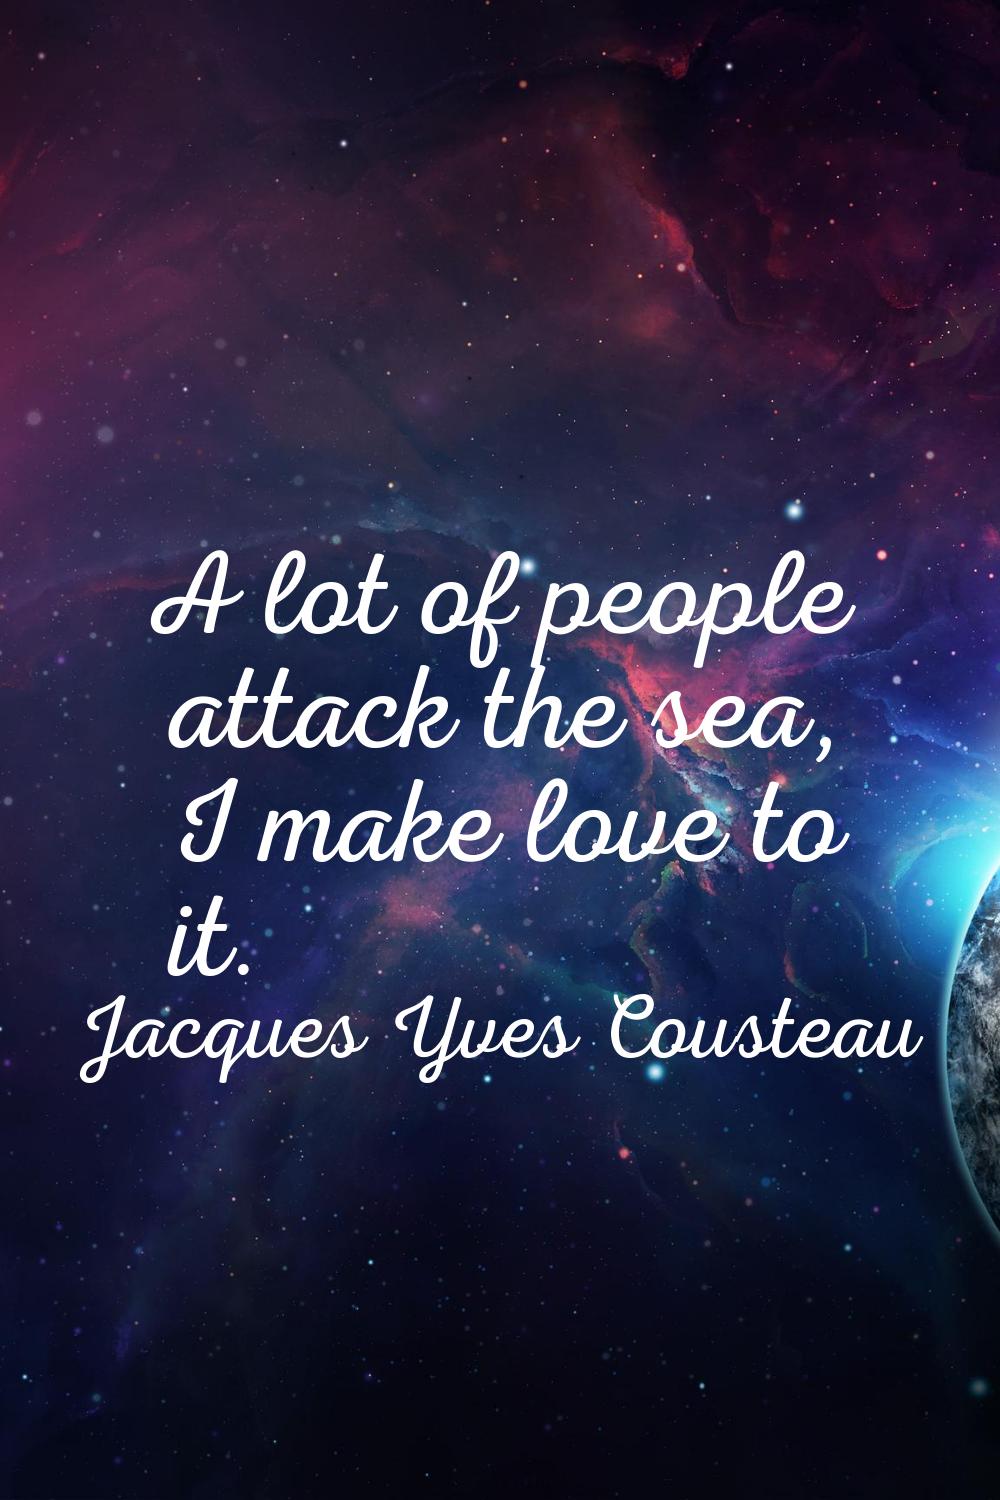 A lot of people attack the sea, I make love to it.